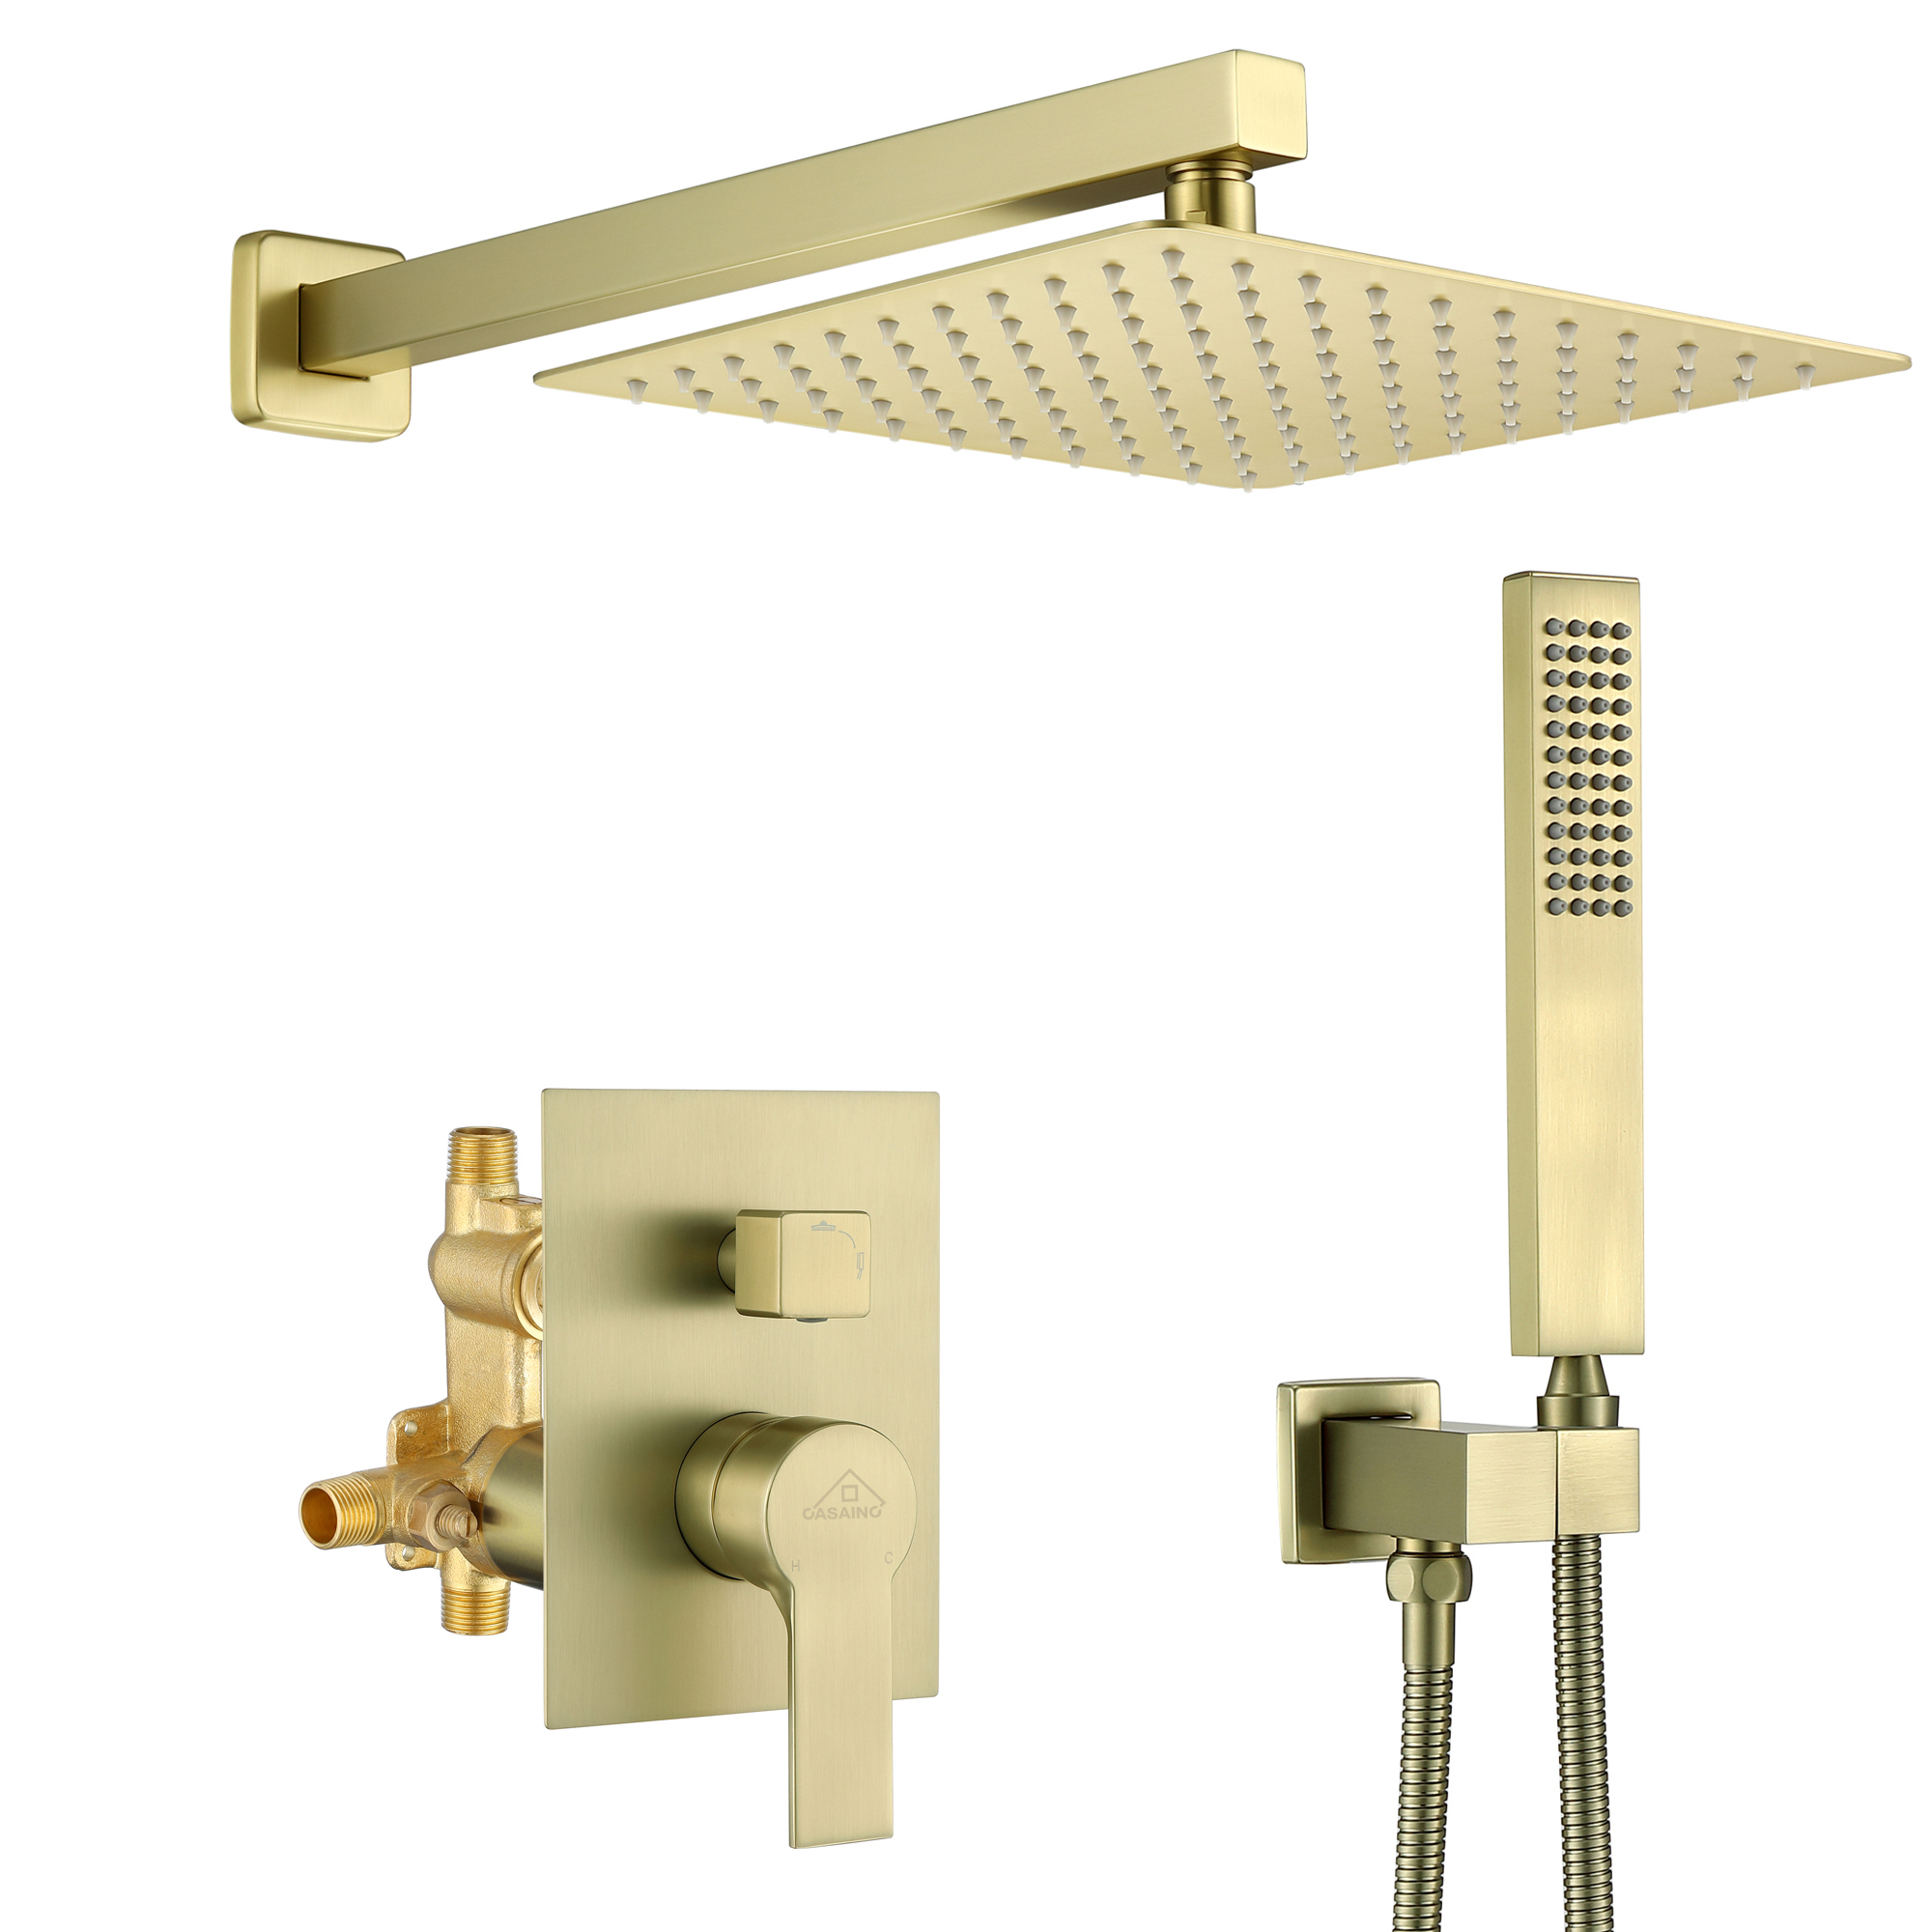 12-in Stainless Steel Wall Mounted Shower System with Rough-In Valve Body and Trim for Balanced Water Pressure (Brushed Gold Rain Shower Head Features Luxury Showers)-CASAINC